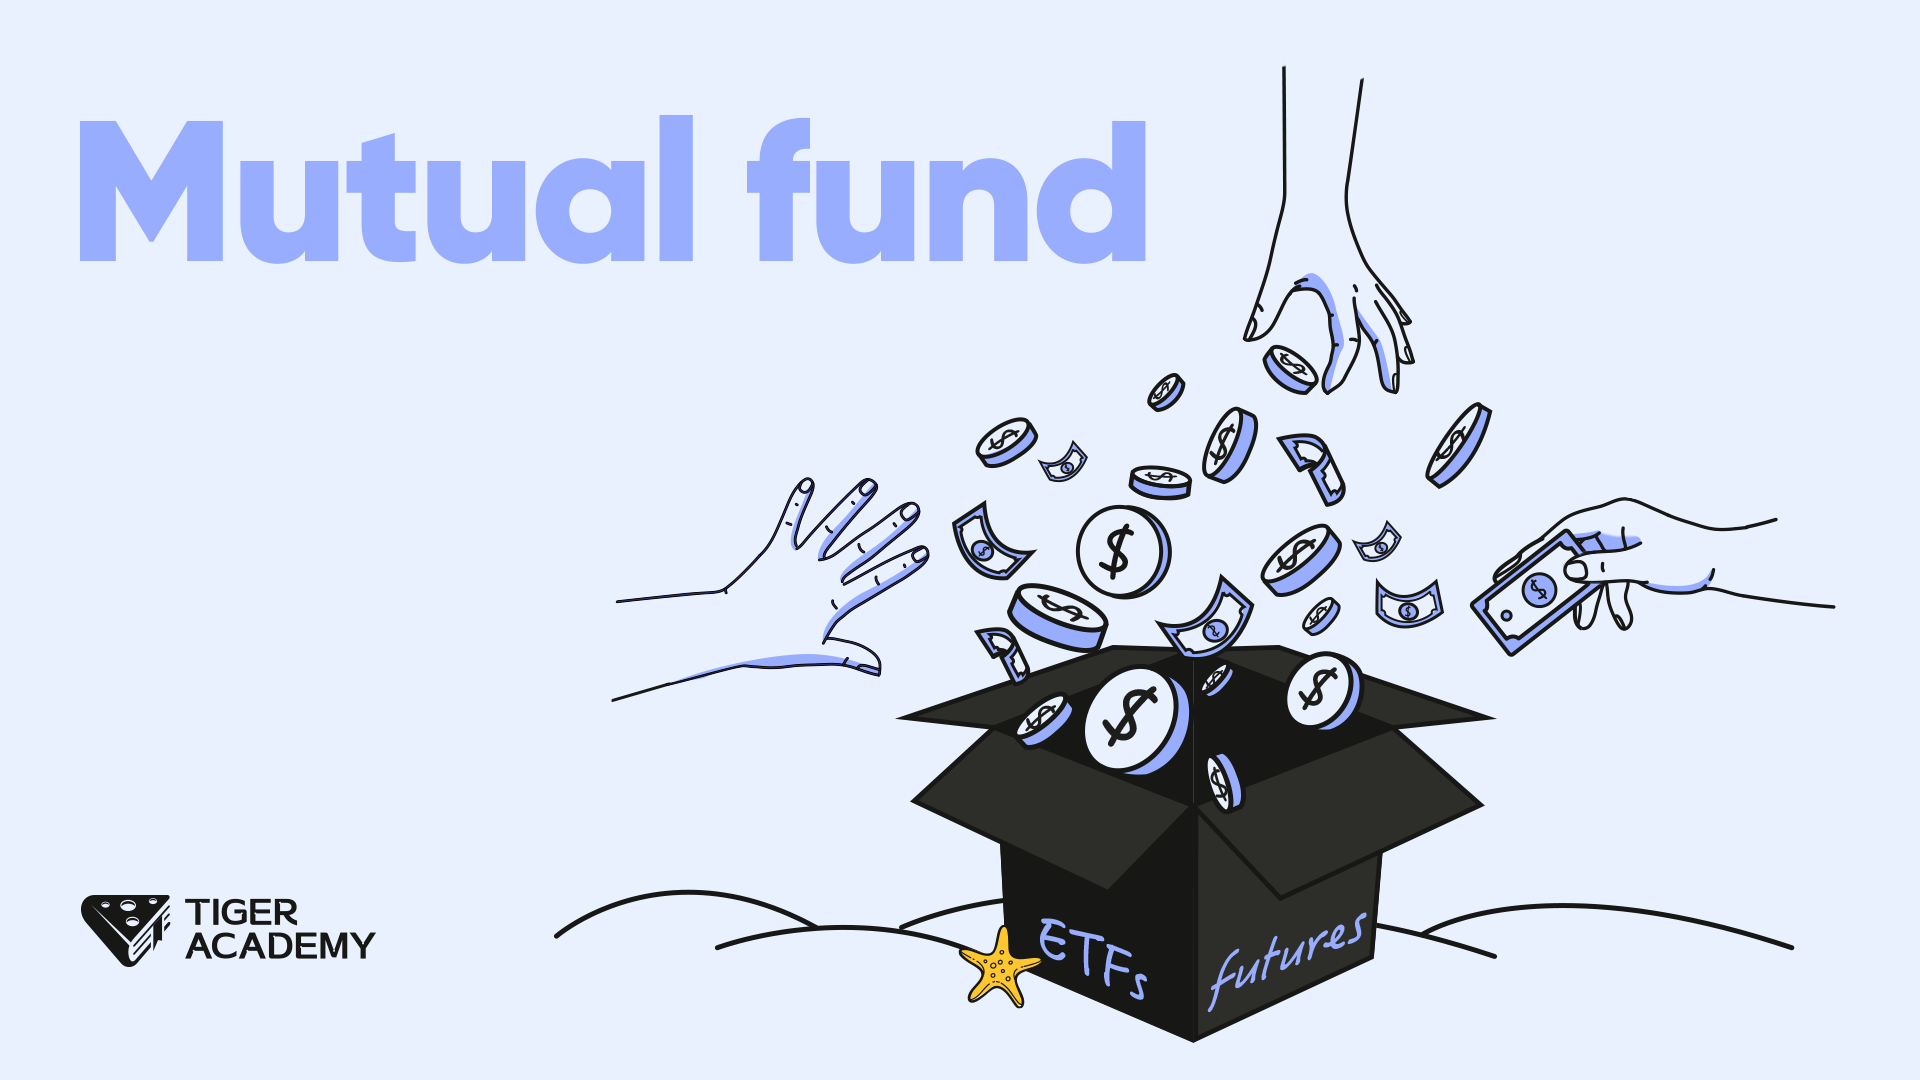 Day49. Mutual funds